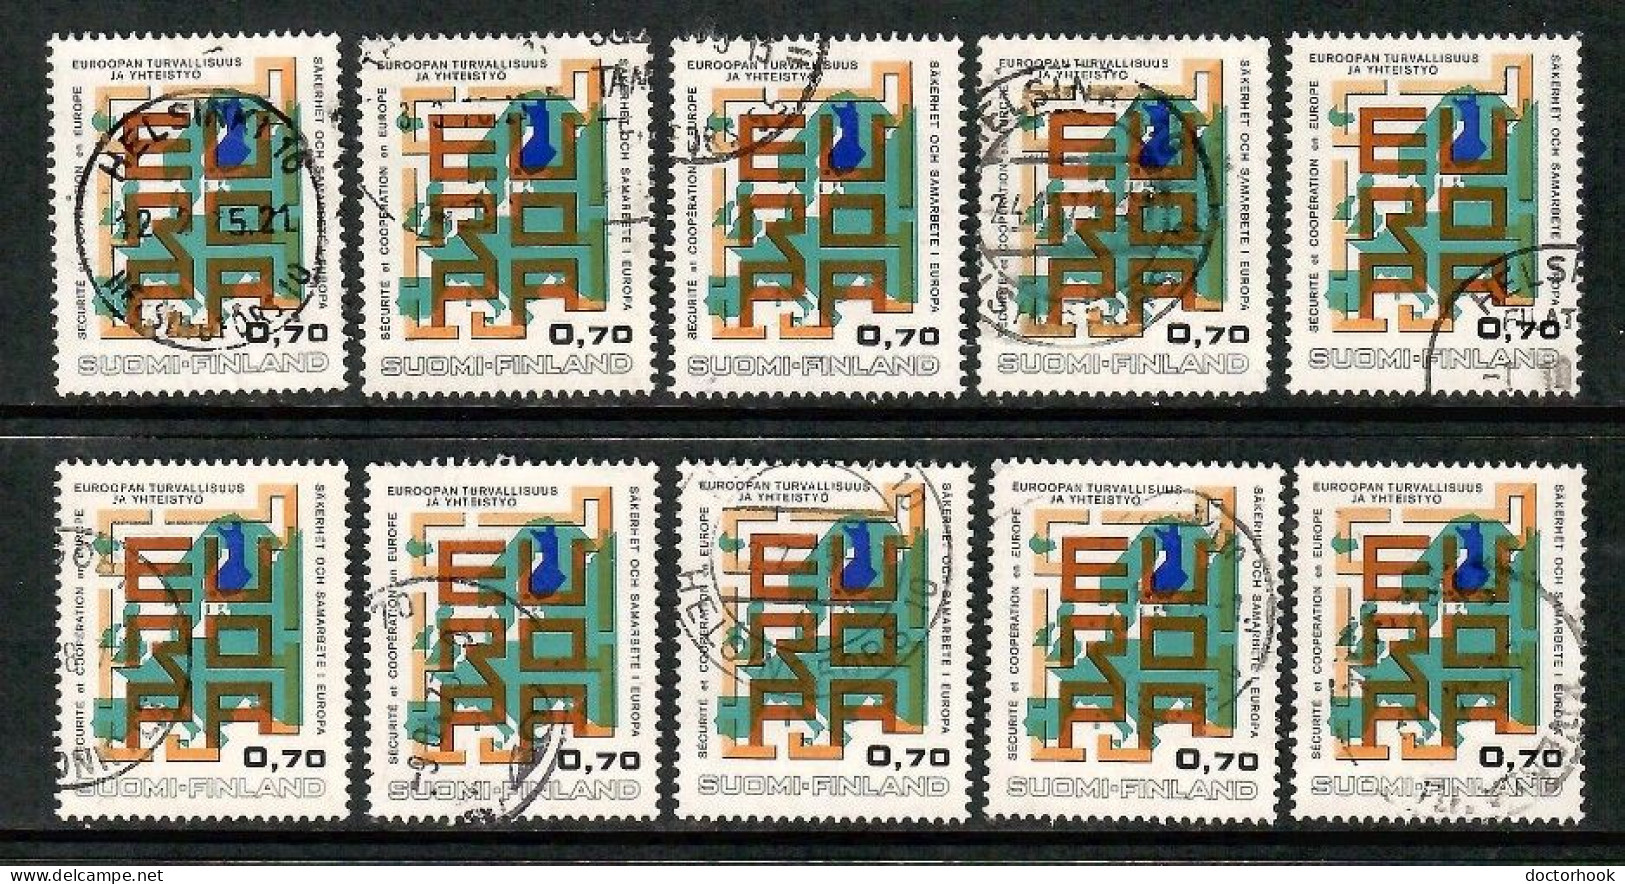 FINLAND   Scott # 529 USED WHOLESALE LOT OF 10 (CONDITION AS PER SCAN) (WH-620) - Collections